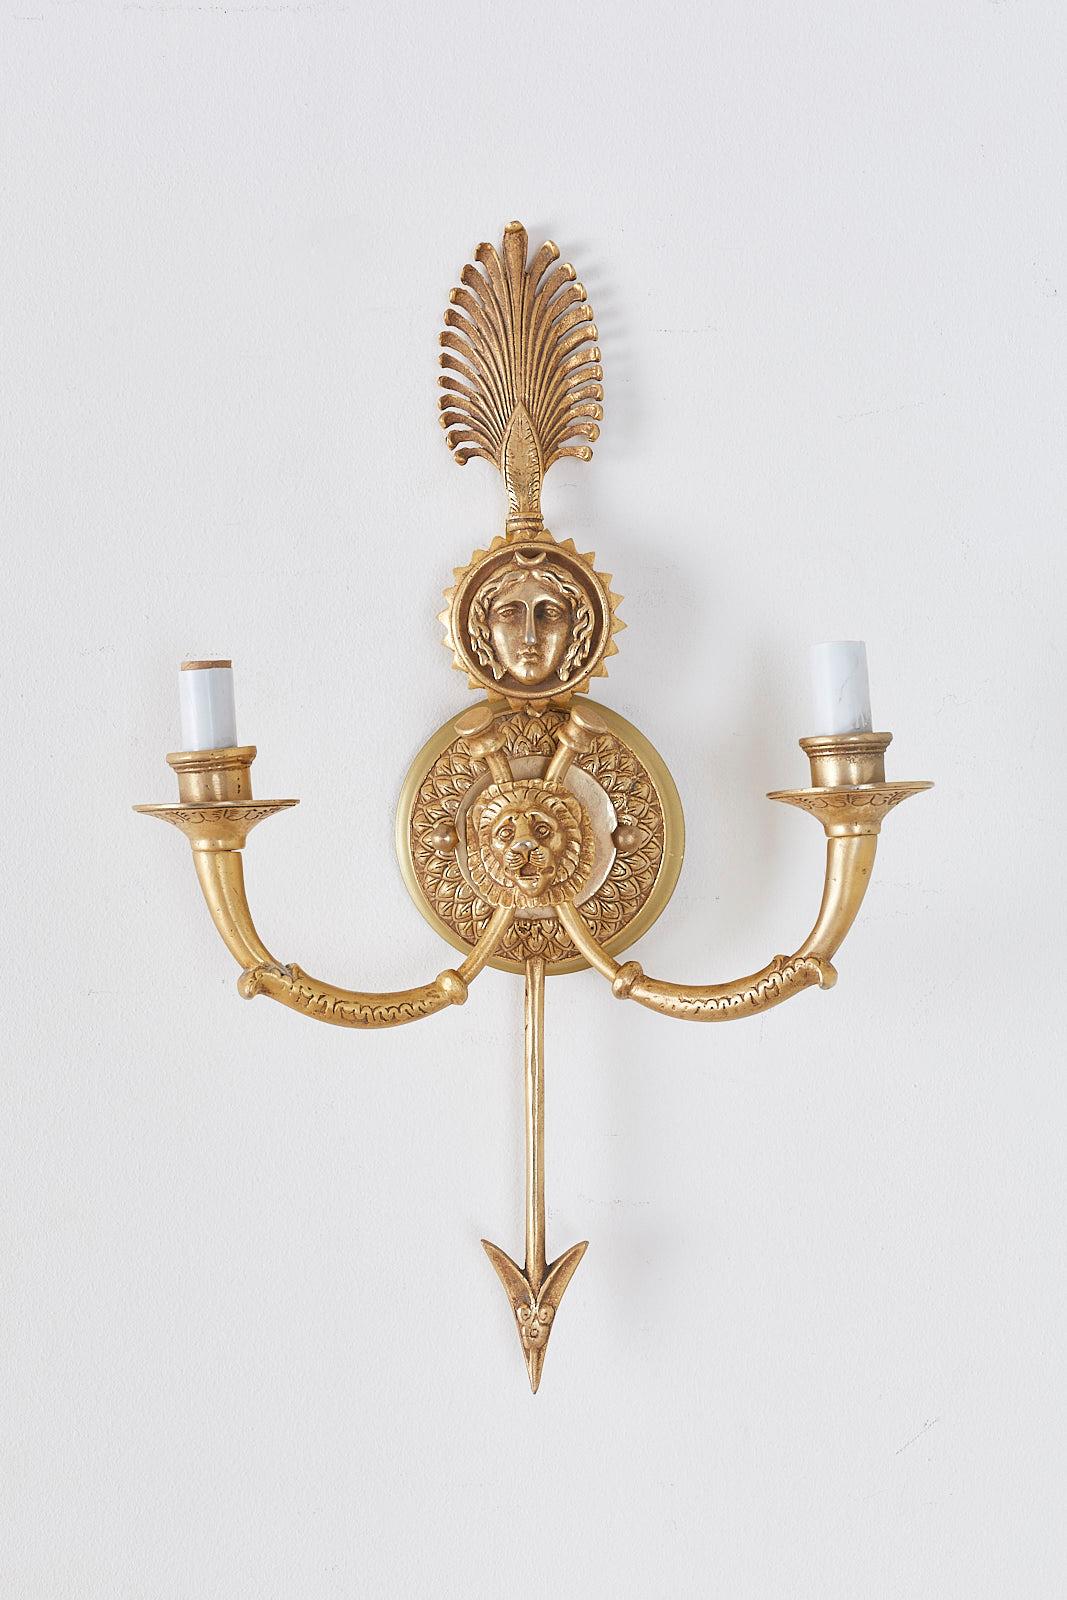 Hand-Crafted Pair of French Gilt Bronze Neoclassical Arrow Sconces